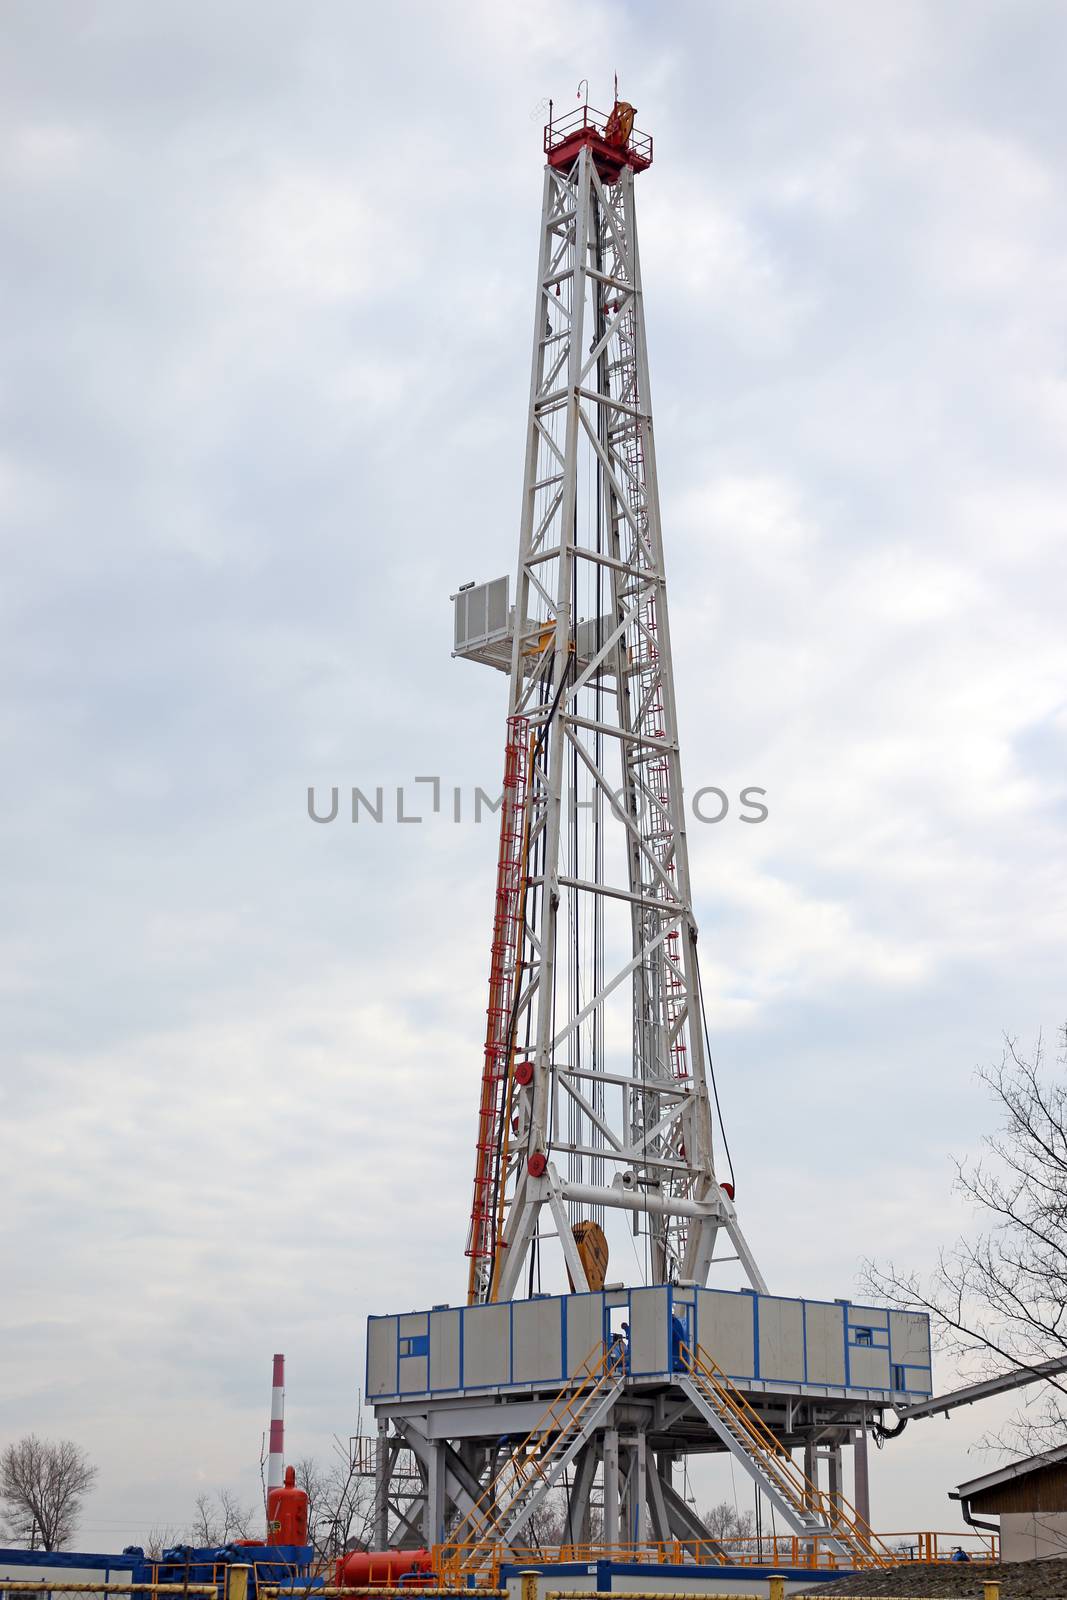 land oil drilling rig heavy industry